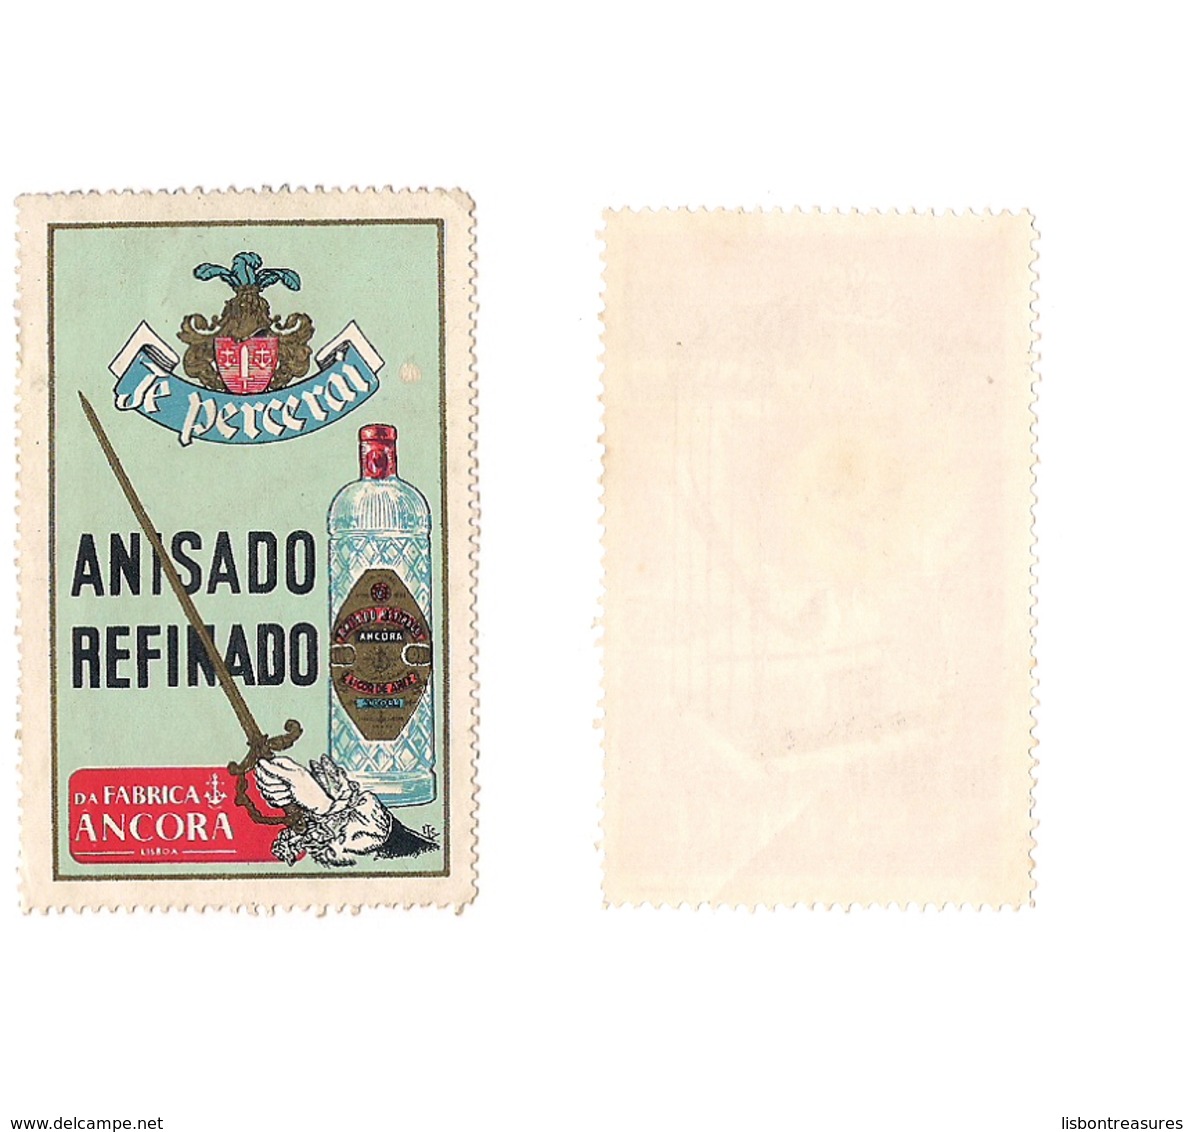 ANTIQUE PORTUGAL CINDERELLA POSTER STAMP ADVERTISING ANIS REFINADO FABRICA ANCORA - Local Post Stamps